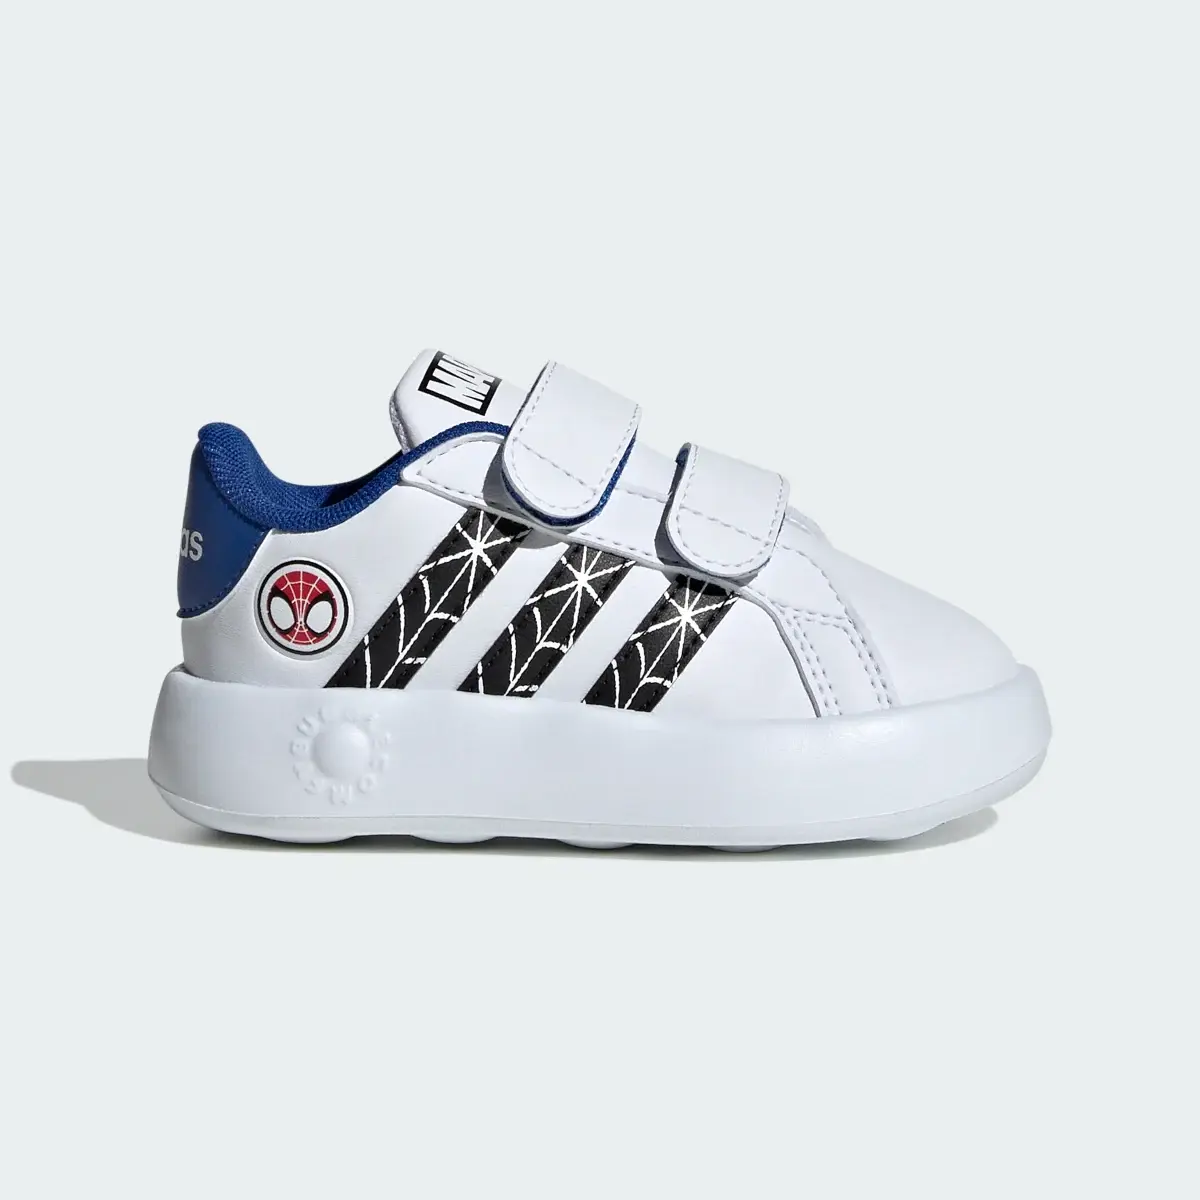 Adidas Marvel's Spider-Man Grand Court Shoes. 2